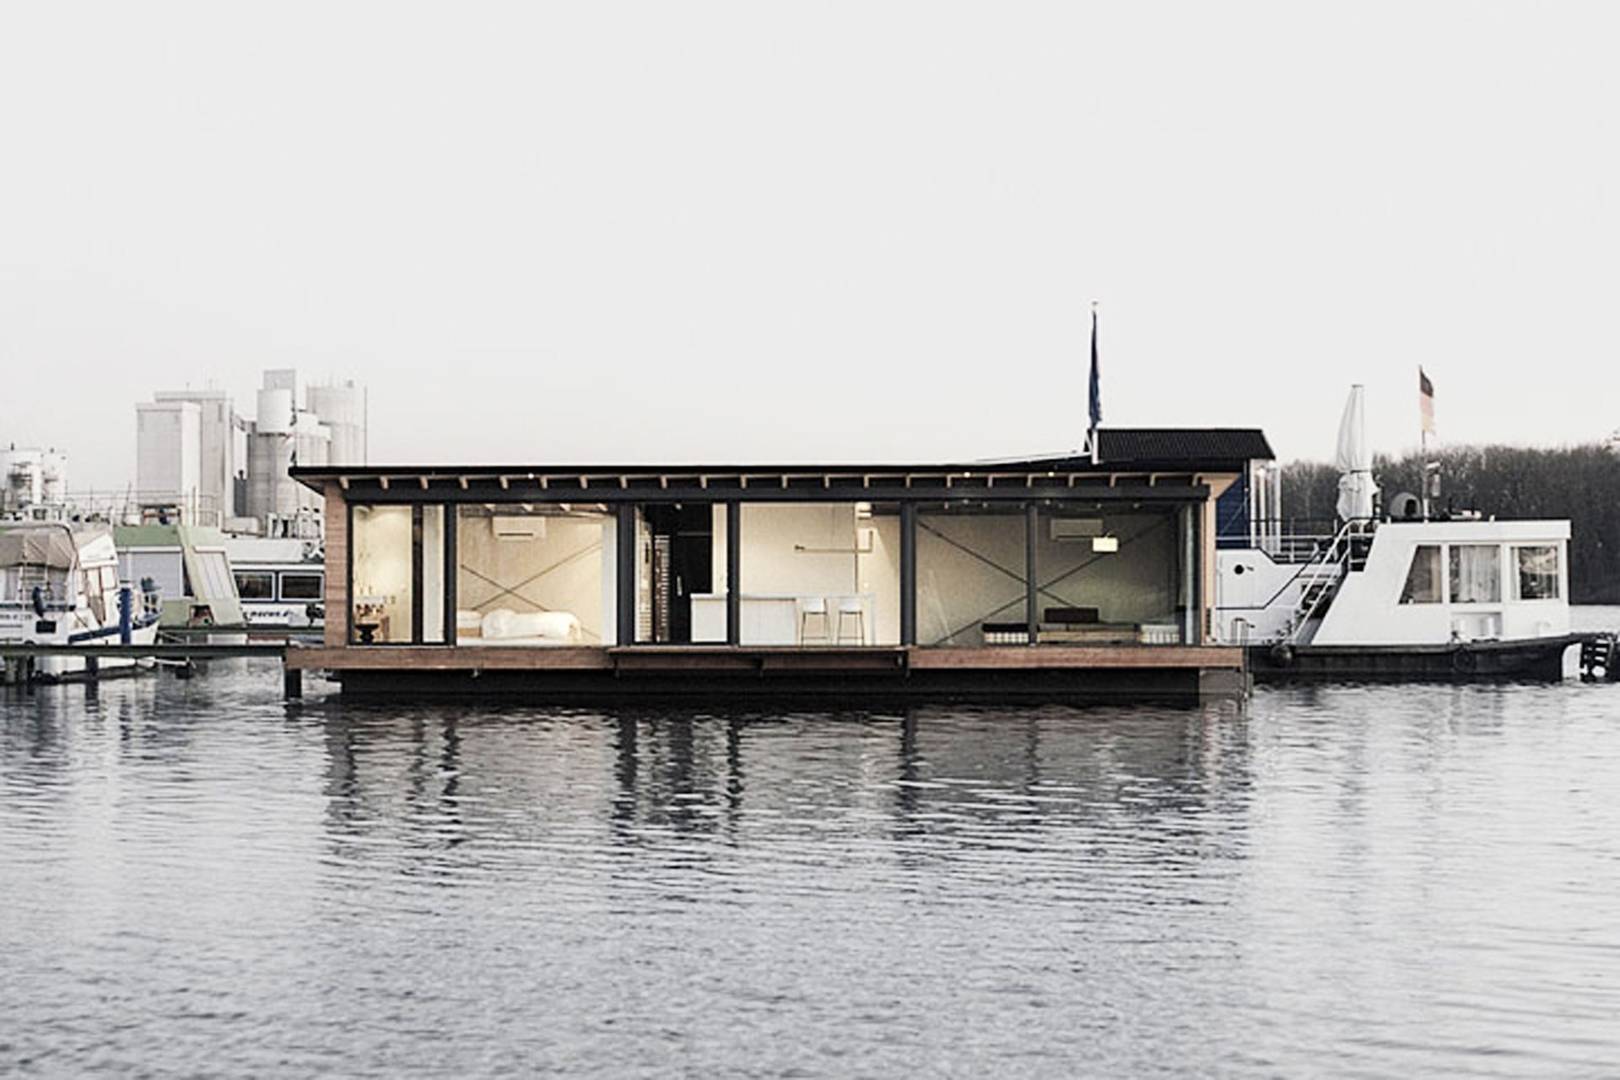 Best Places To Stay In Berlin Houseboats To Rent In Friedrichshain Kreuzberg Cn Traveller